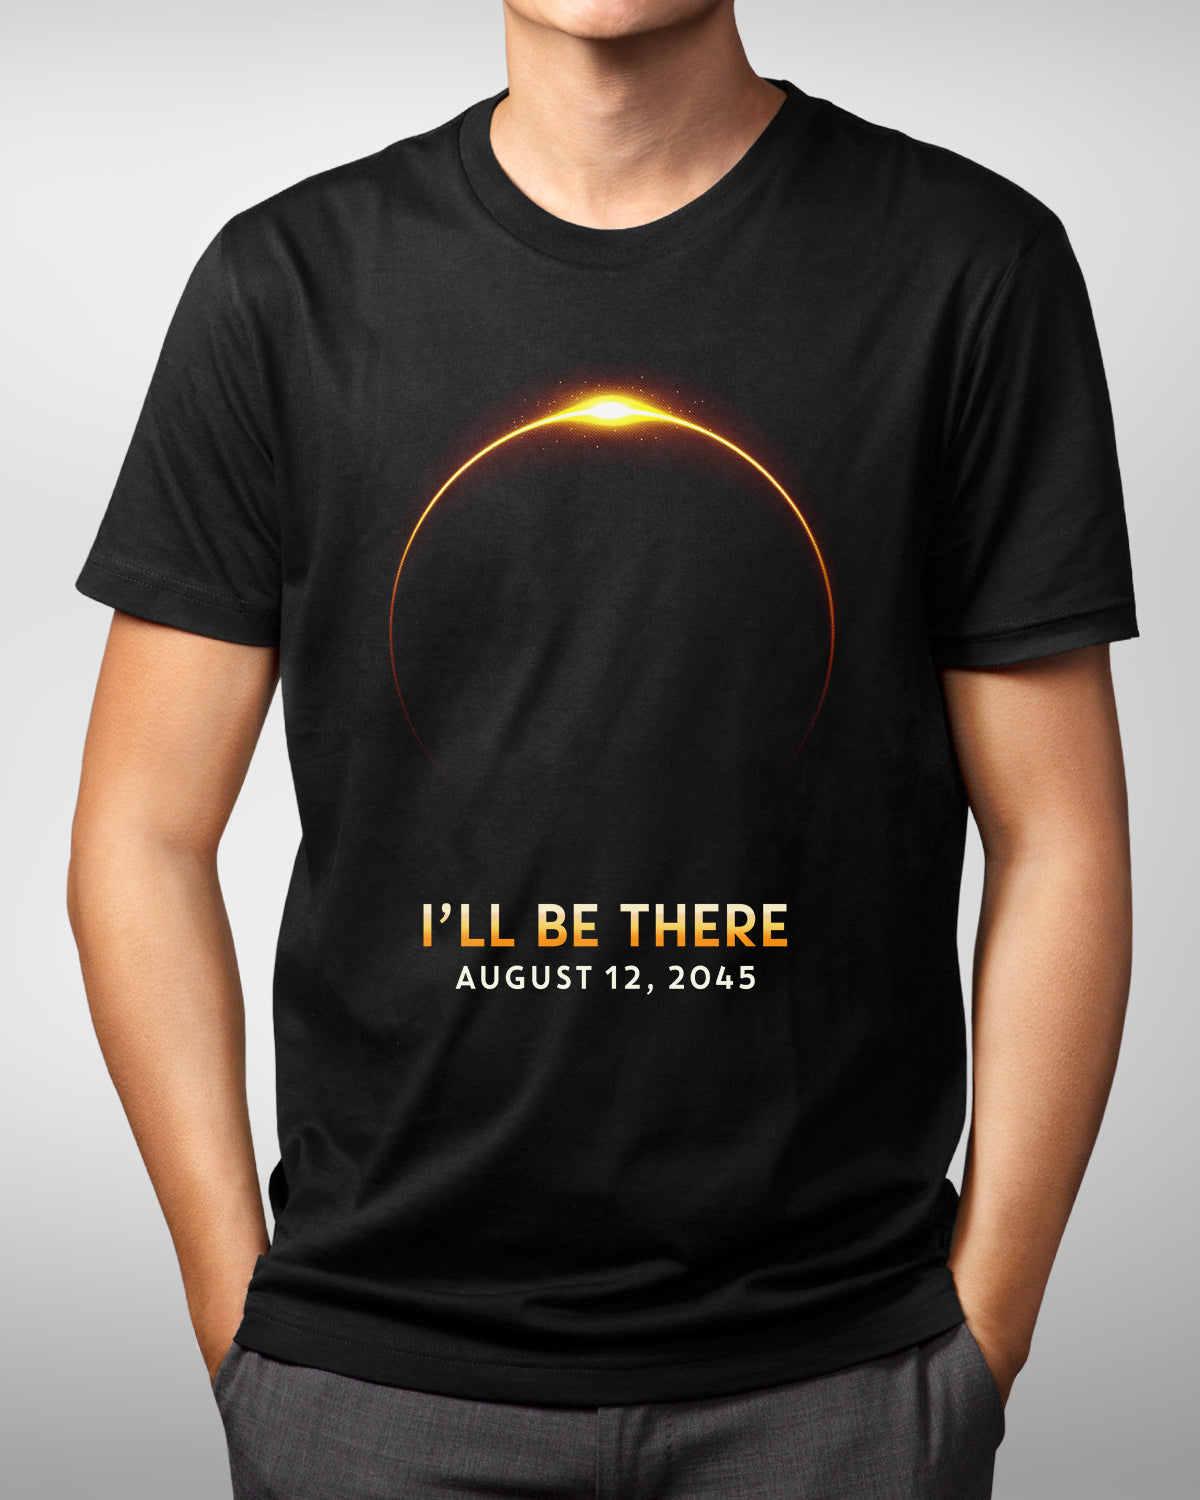 Total Solar Eclipse Shirt, I'll Be There August 12 2045, Eclipse Viewing Tee, Astronomy Lover, Totality Eclipse Chaser Gift